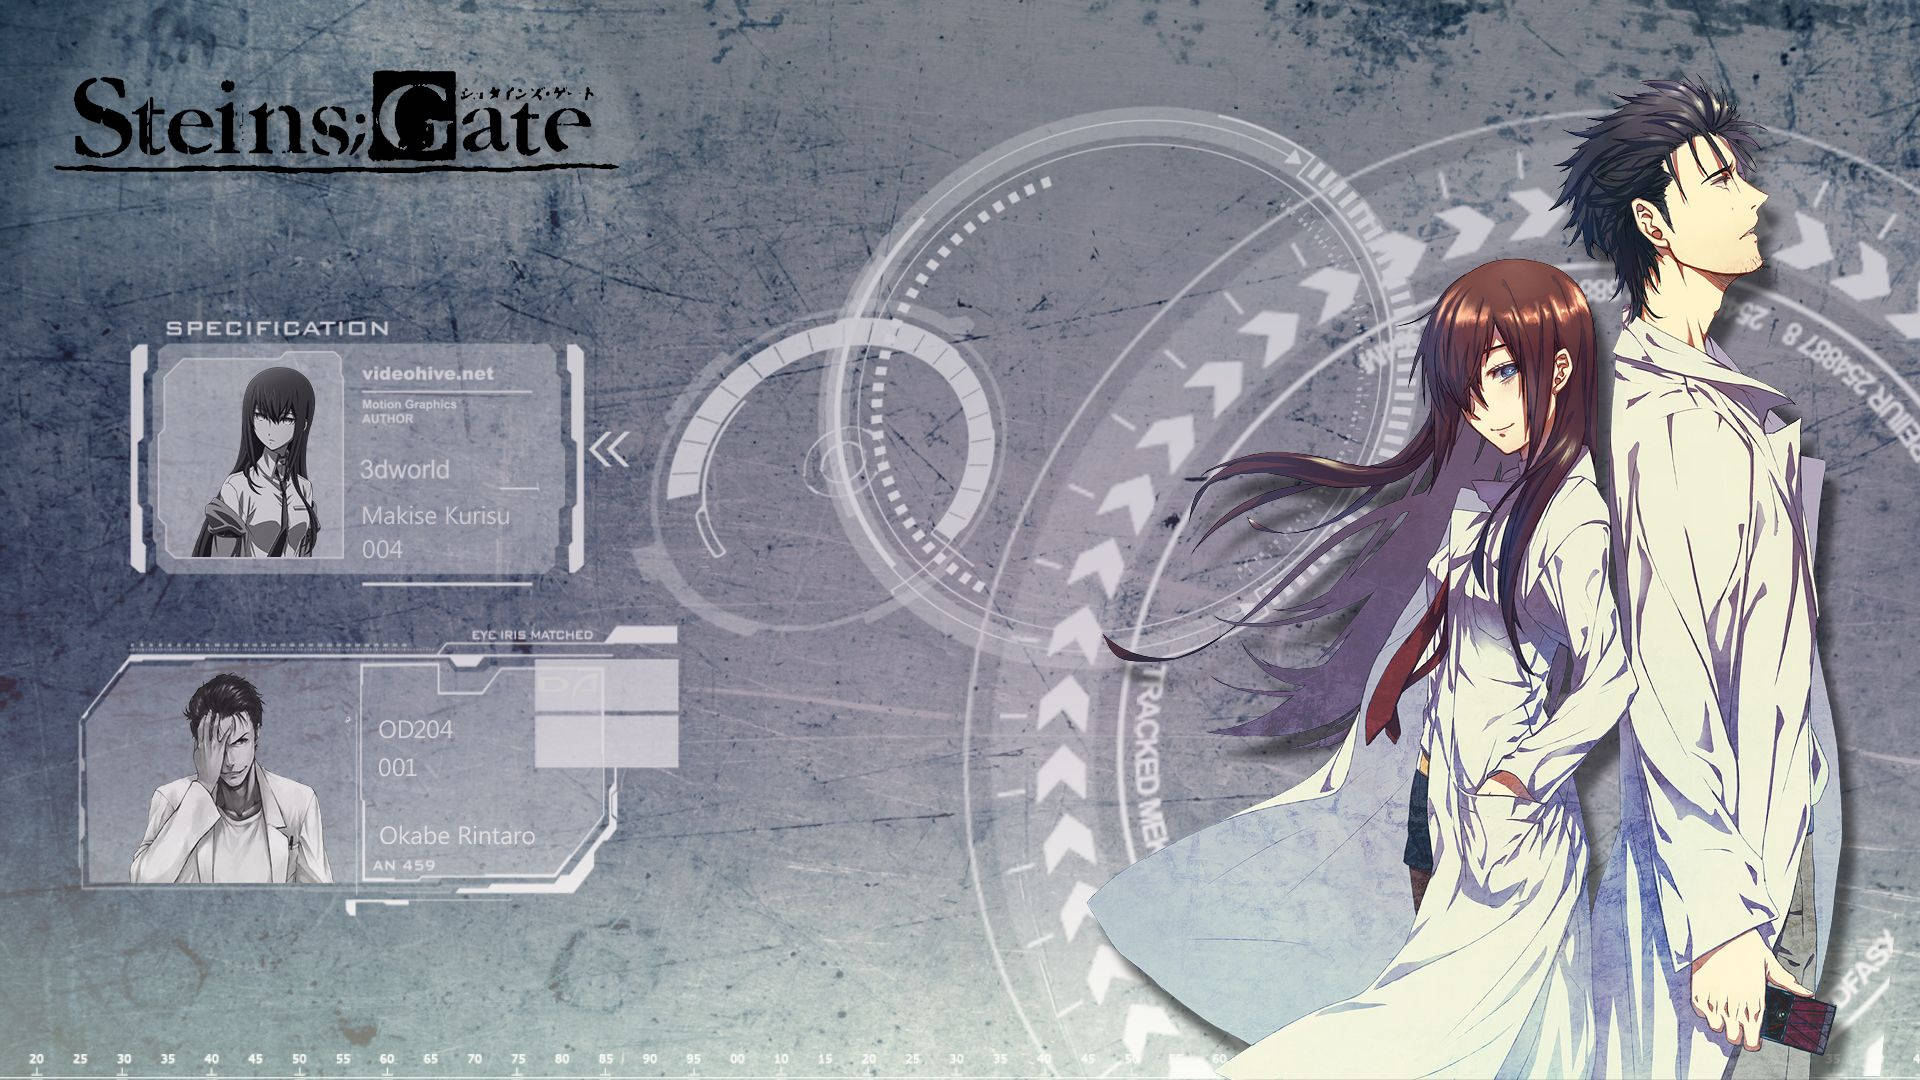 Find your place in time with the Steins Gate Digital Identification Poster Wallpaper